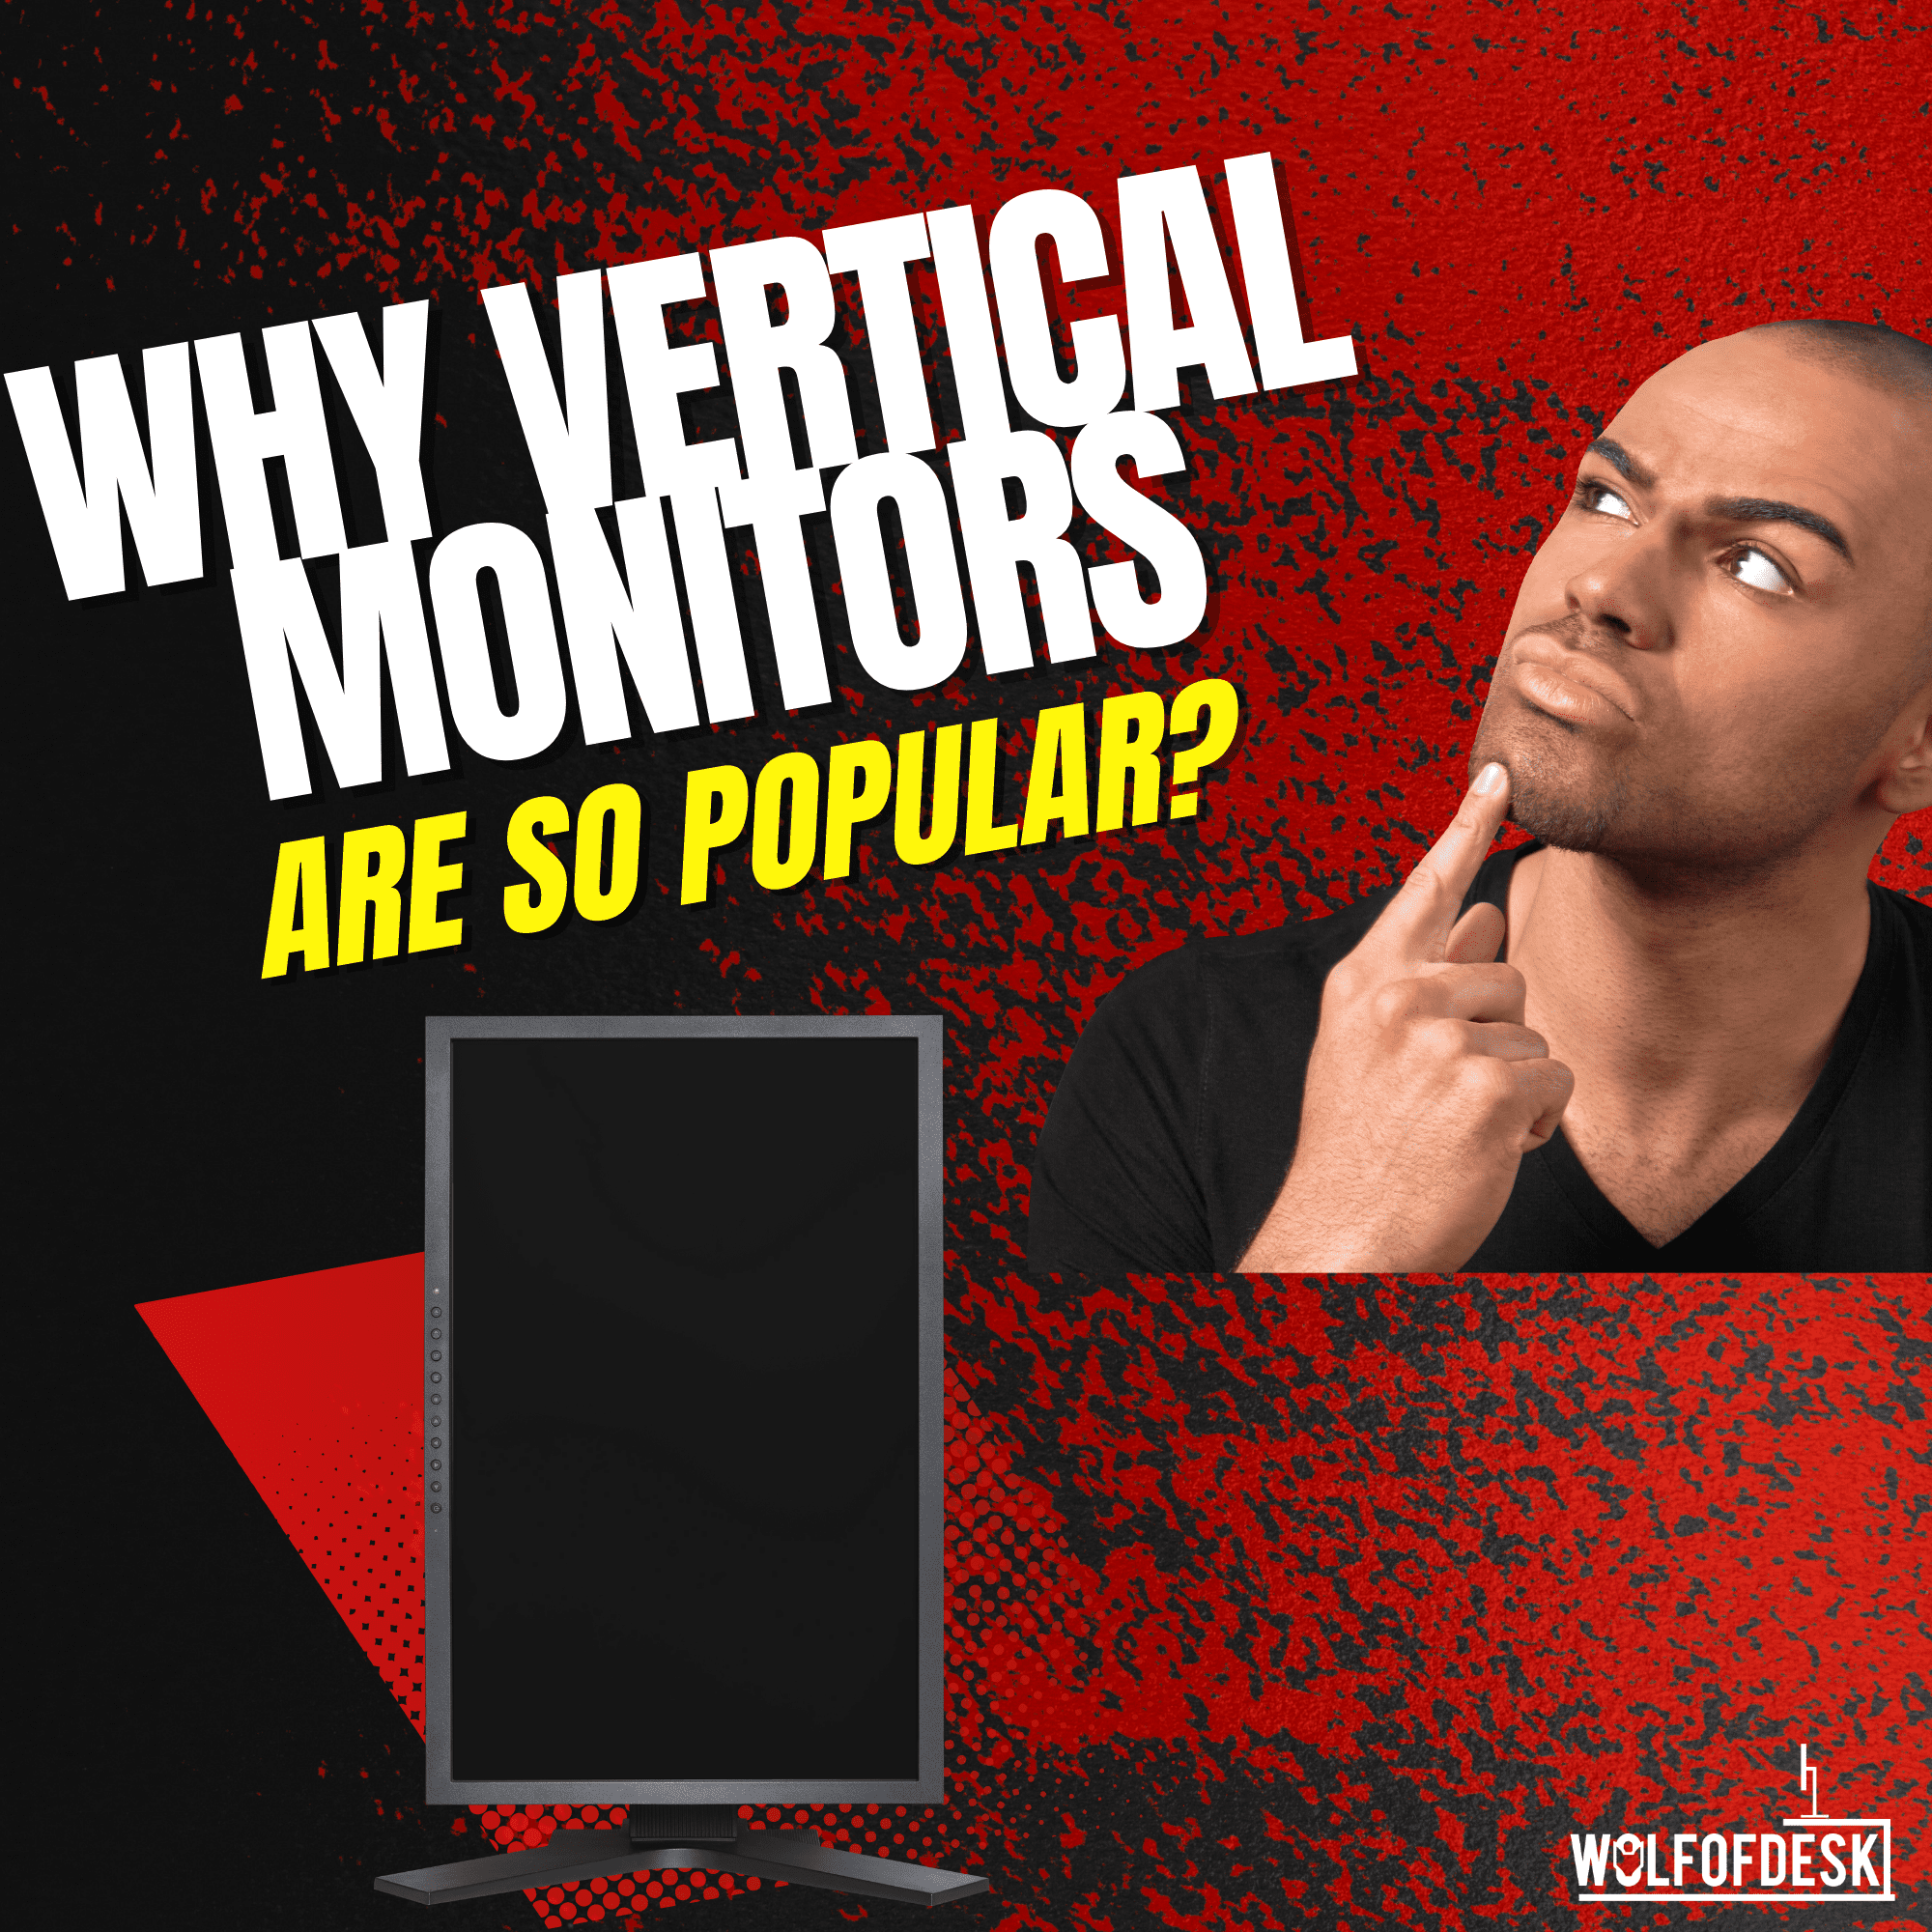 why vertical monitors are so popular - answered